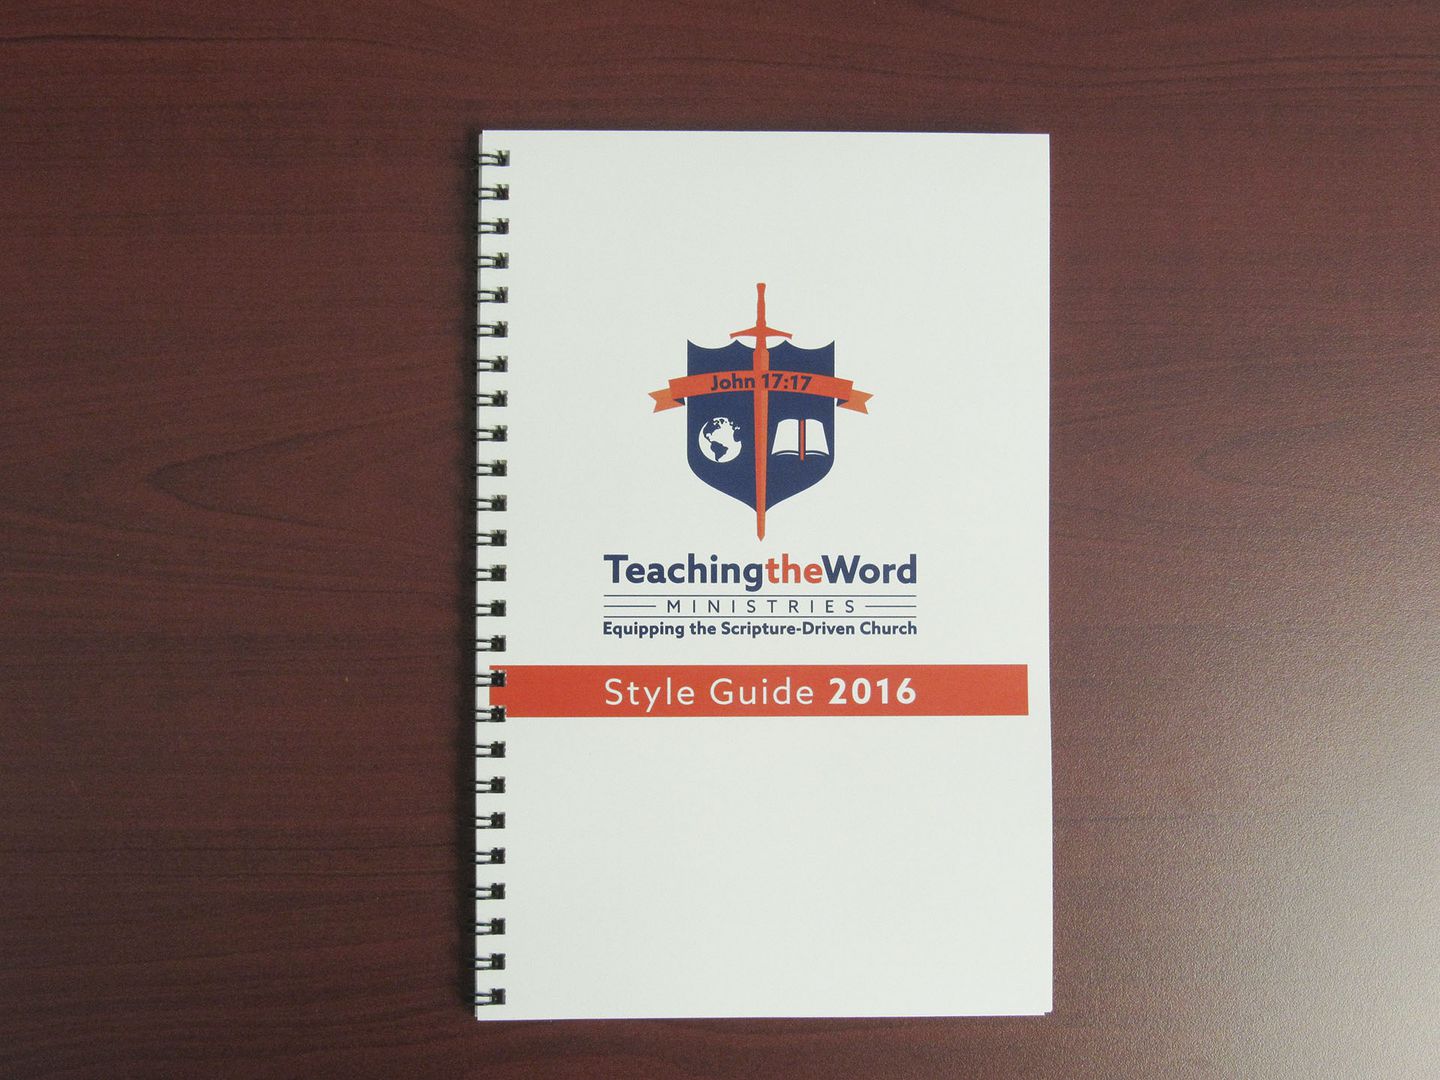 The completed, spiral-bound style guide booklet laying on a table.